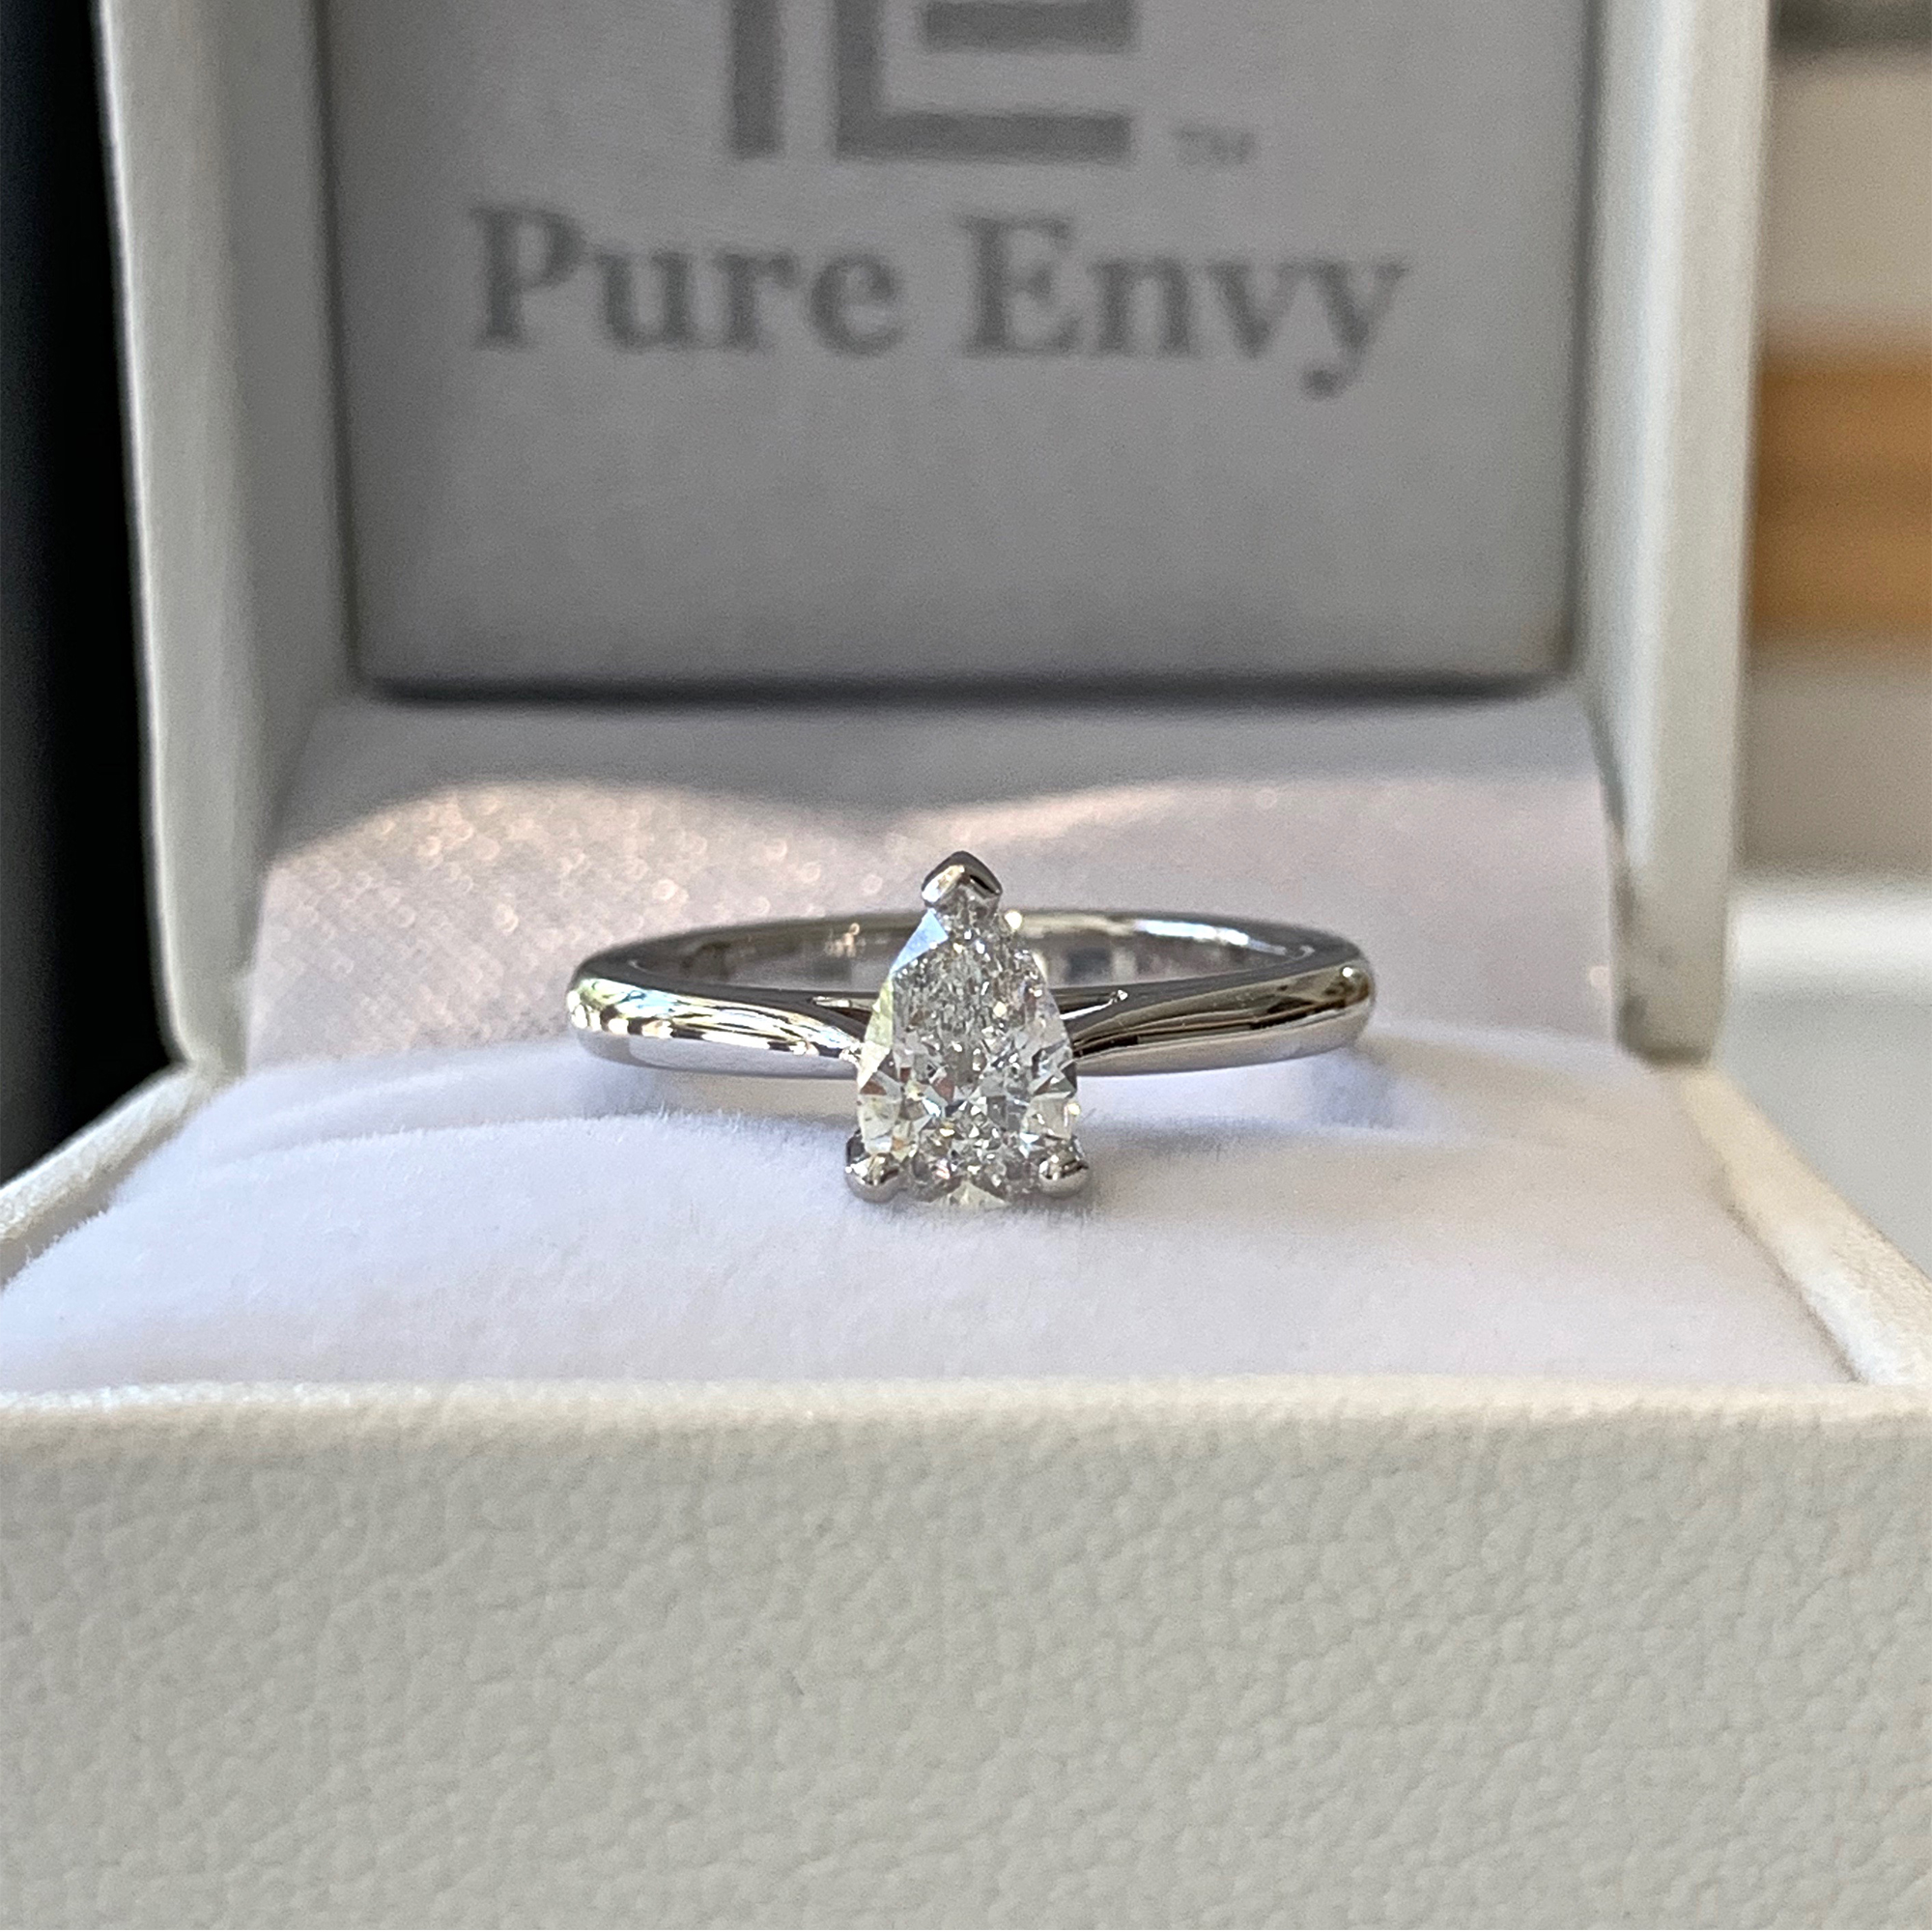 solitaire diamond engagement rings